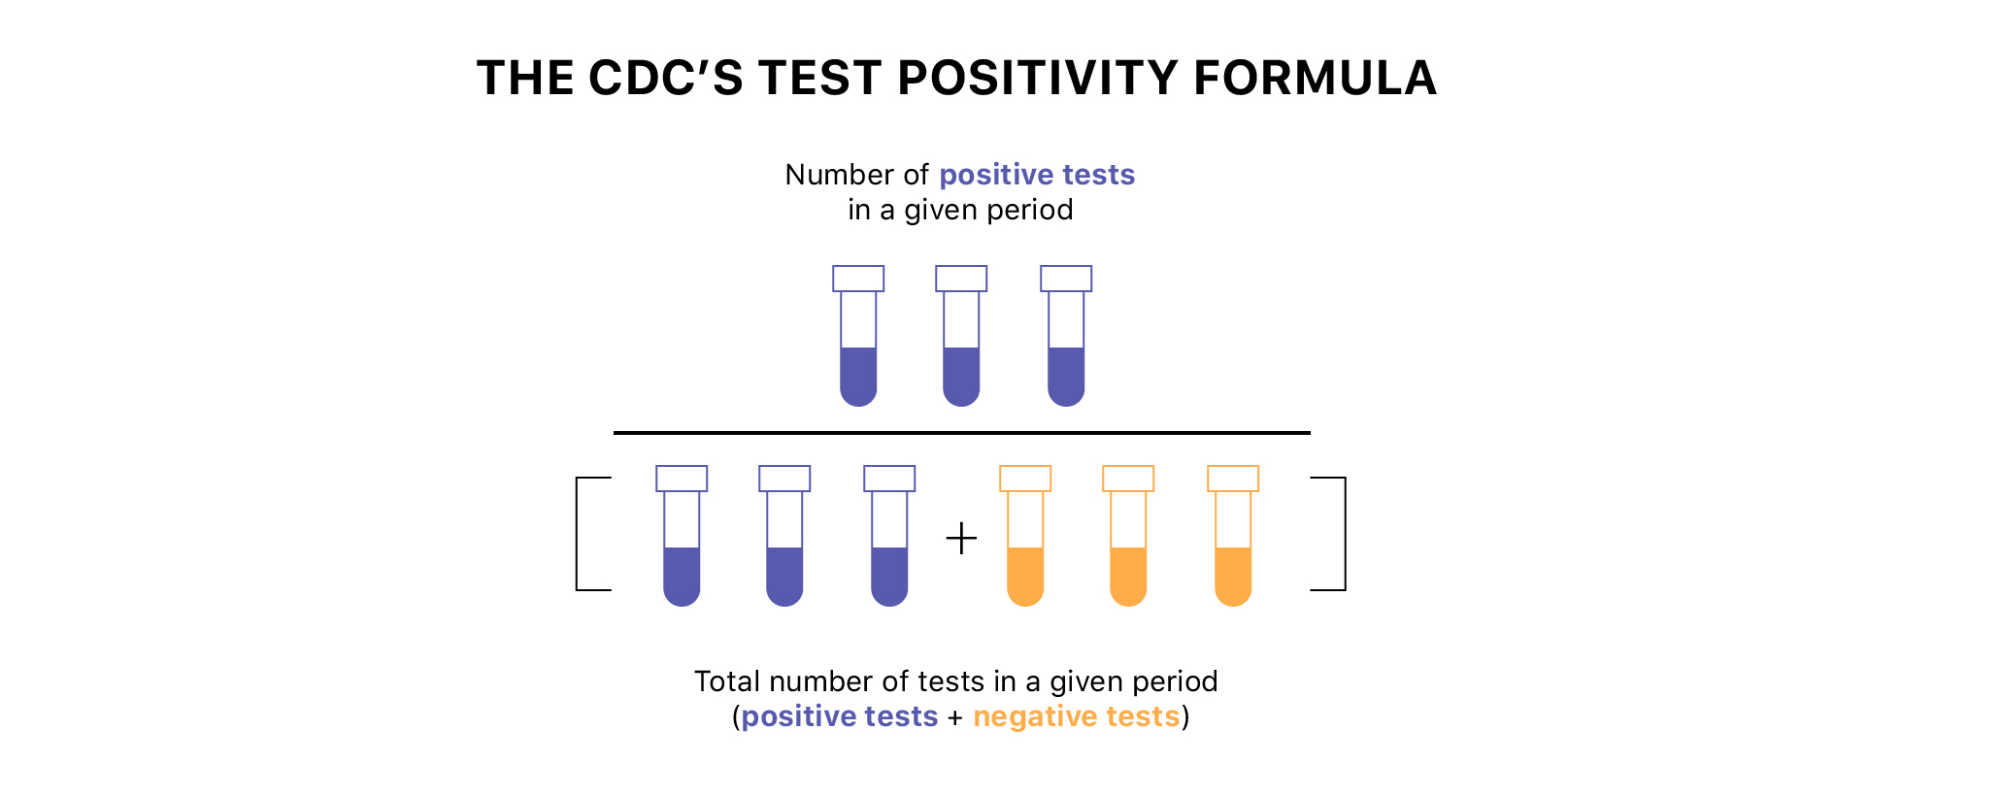 Graphic depicting how CDC calculates the percentage of positive tests (or test positivity). The CDC divides the number of positive tests by the total number of tests, for a select period of time. Then, they multiply the result by 100.